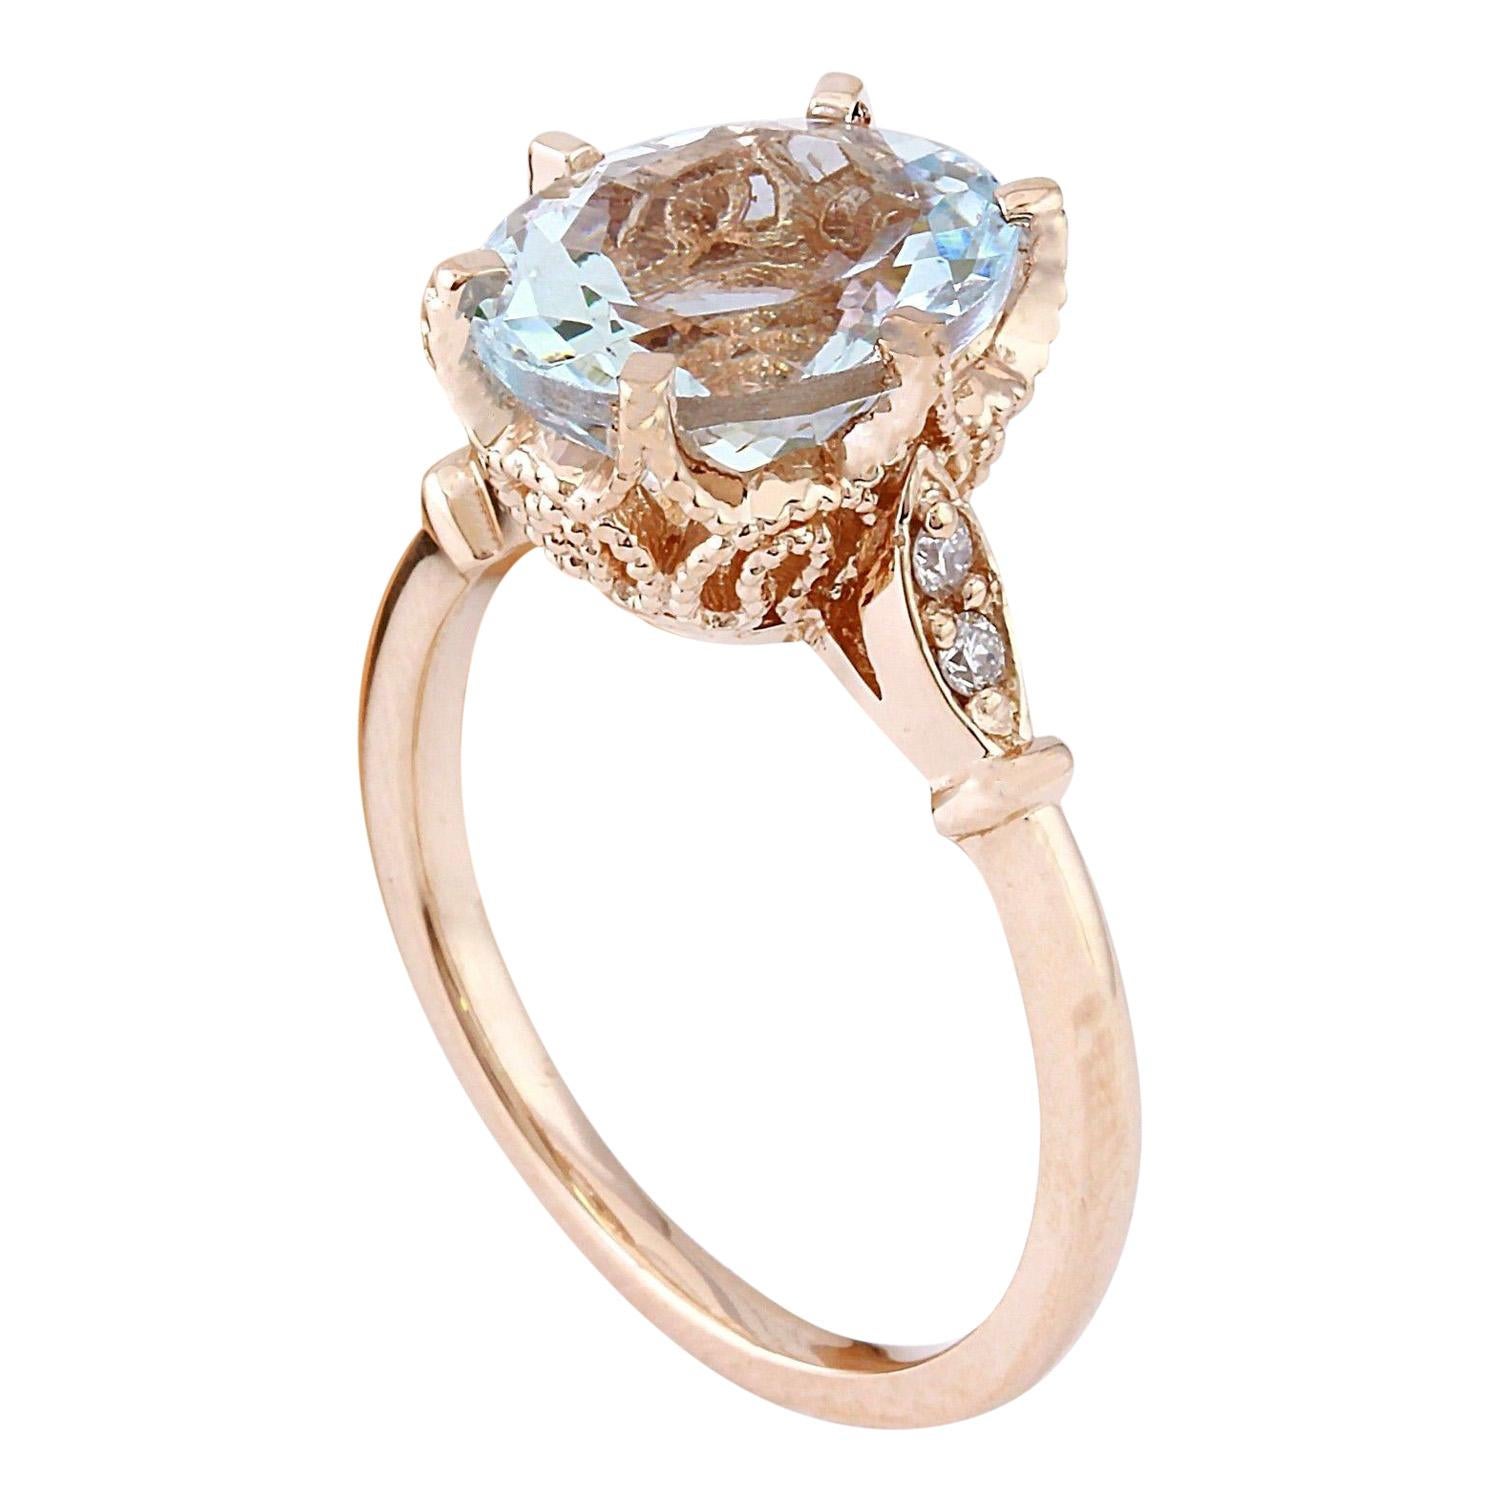 3.40 Carat Natural Aquamarine 14 Karat Solid Rose Gold Diamond Ring In New Condition For Sale In Los Angeles, CA